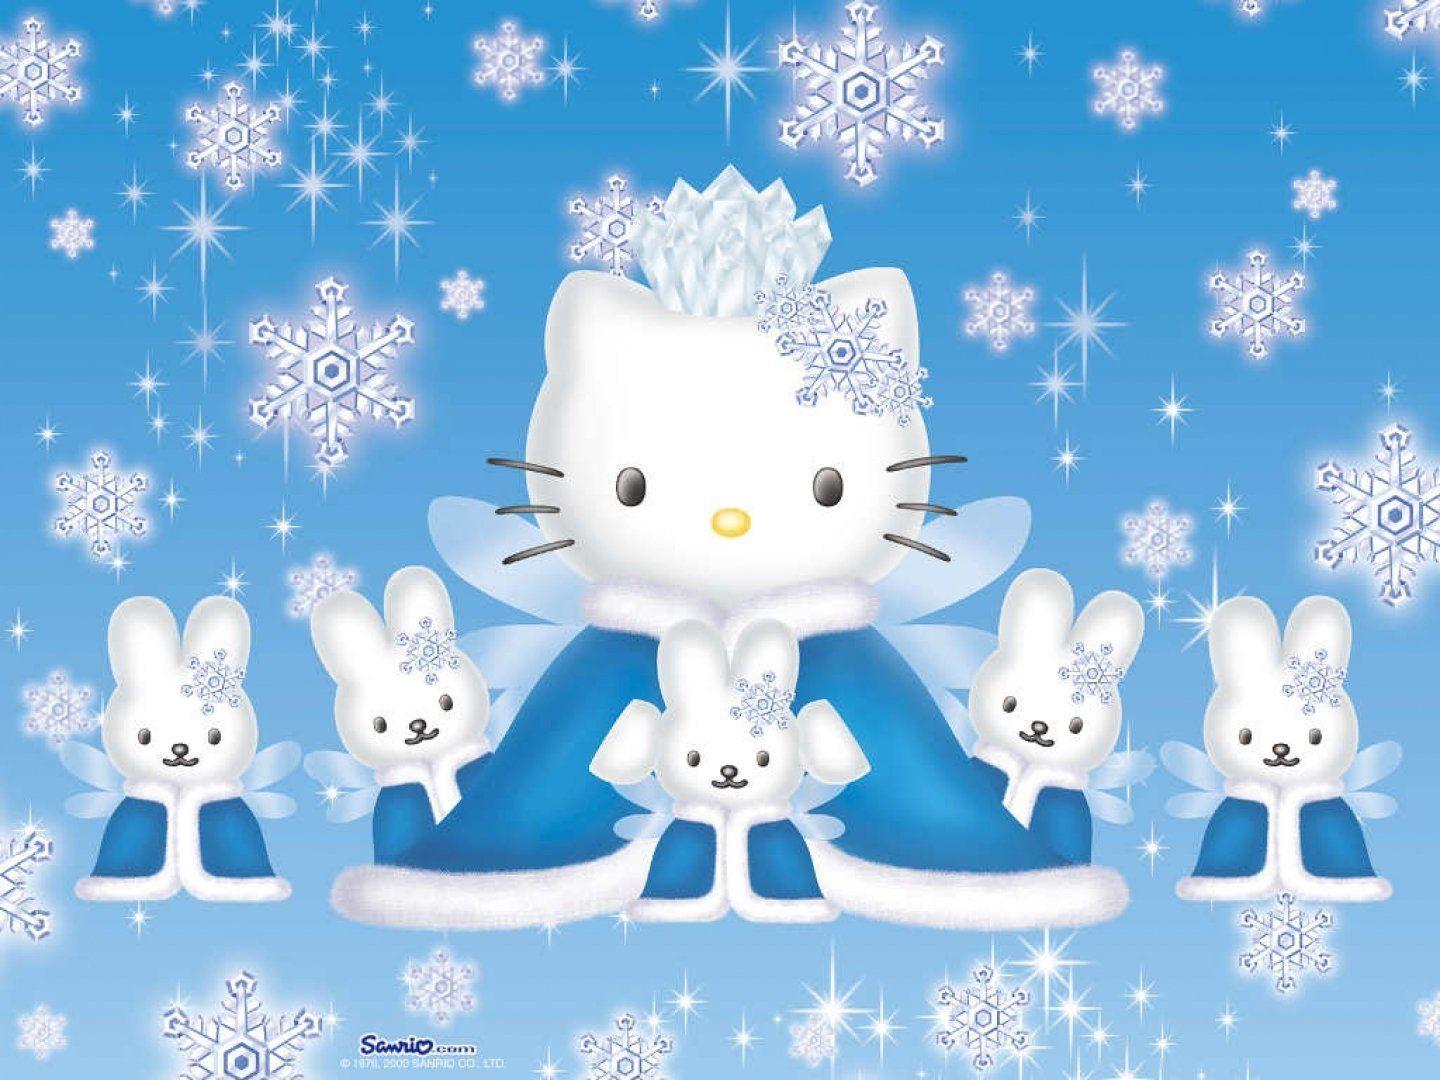 Hello Kitty HD Wallpaper and Background Image